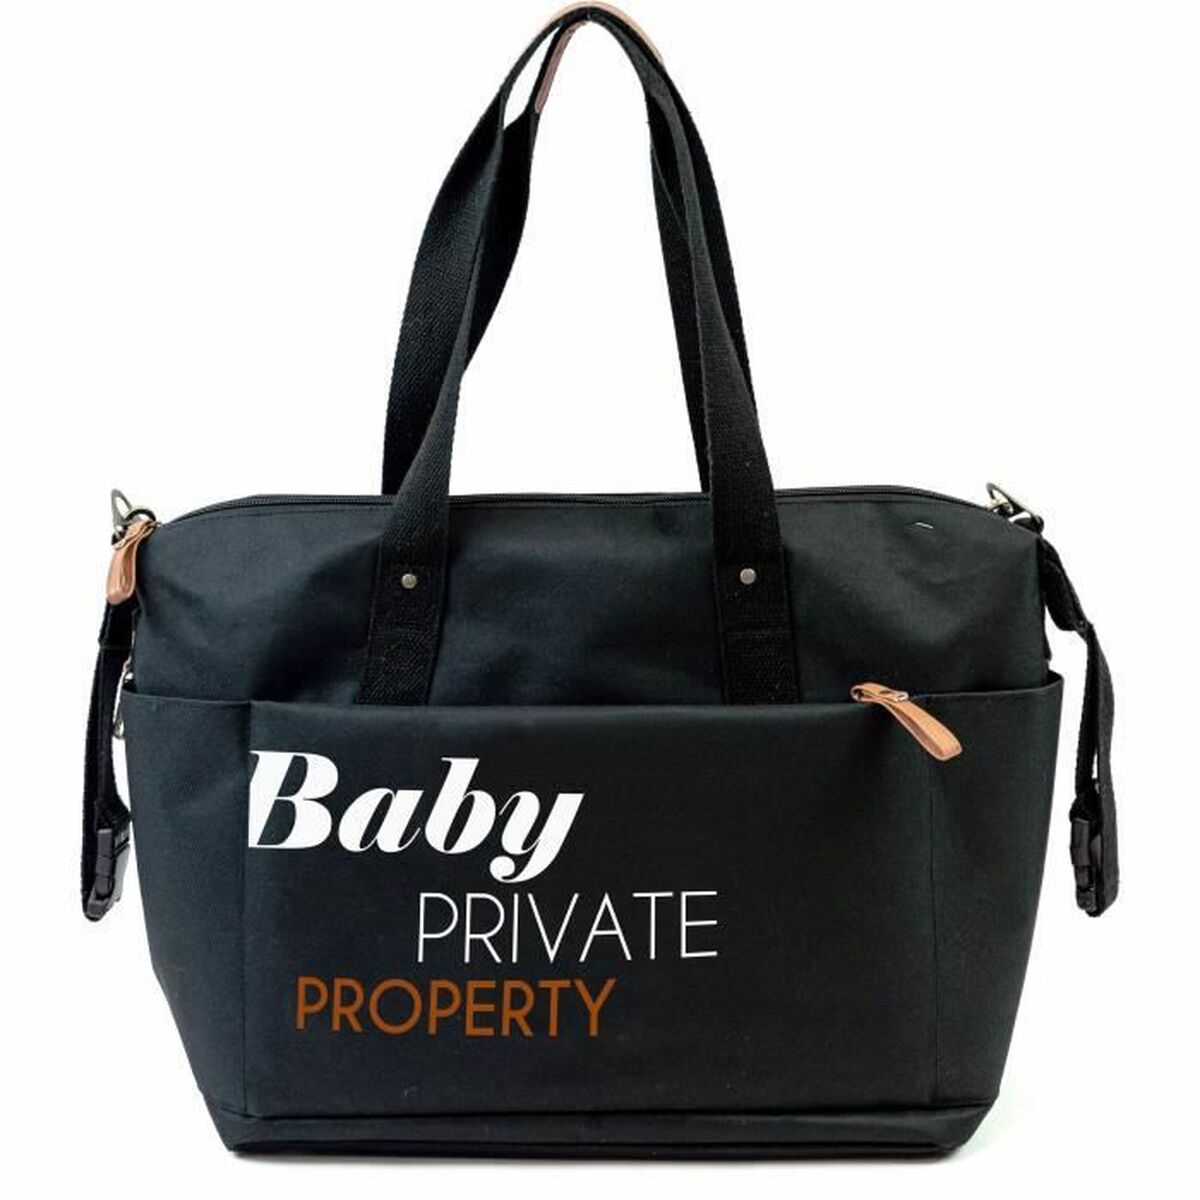 Diaper Changing Bag Baby on Board Simply duffle Black - Little Baby Shop